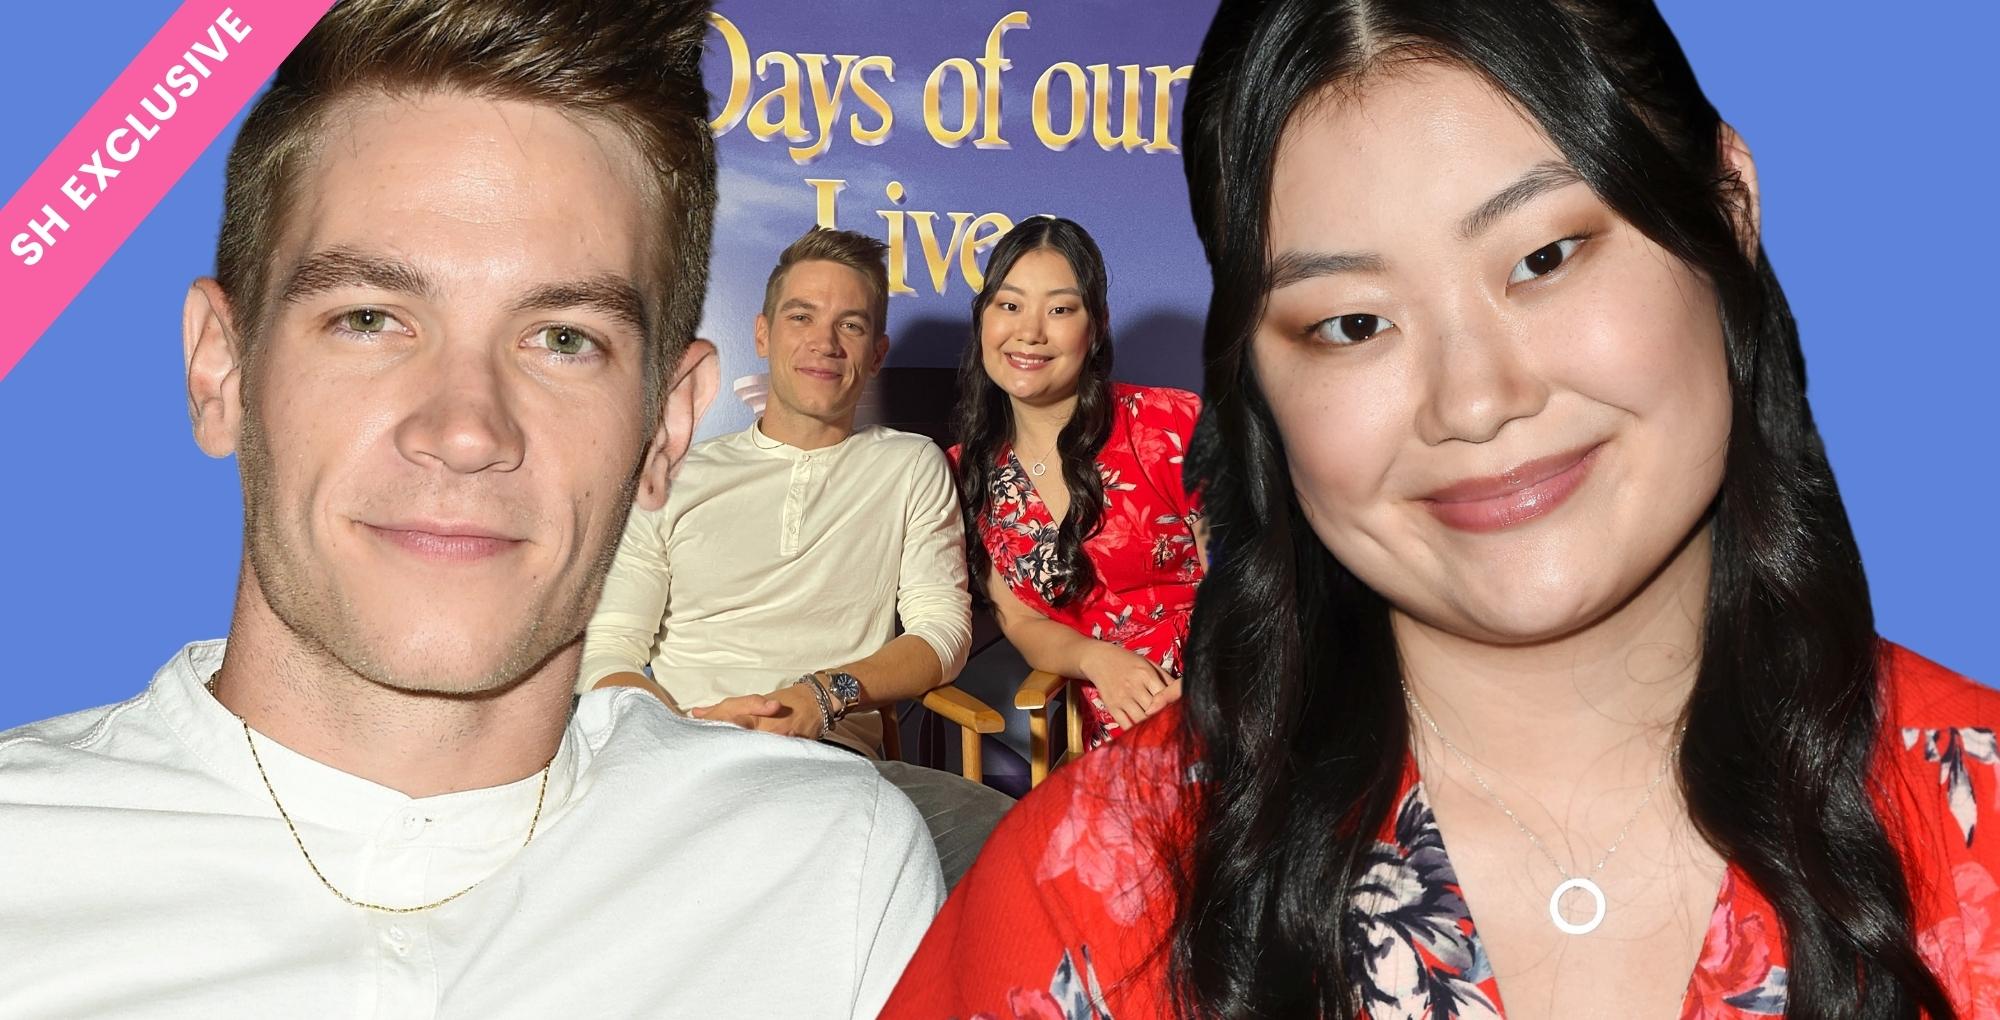 days of our lives exclusive interview with lucas adams and victoria grace.